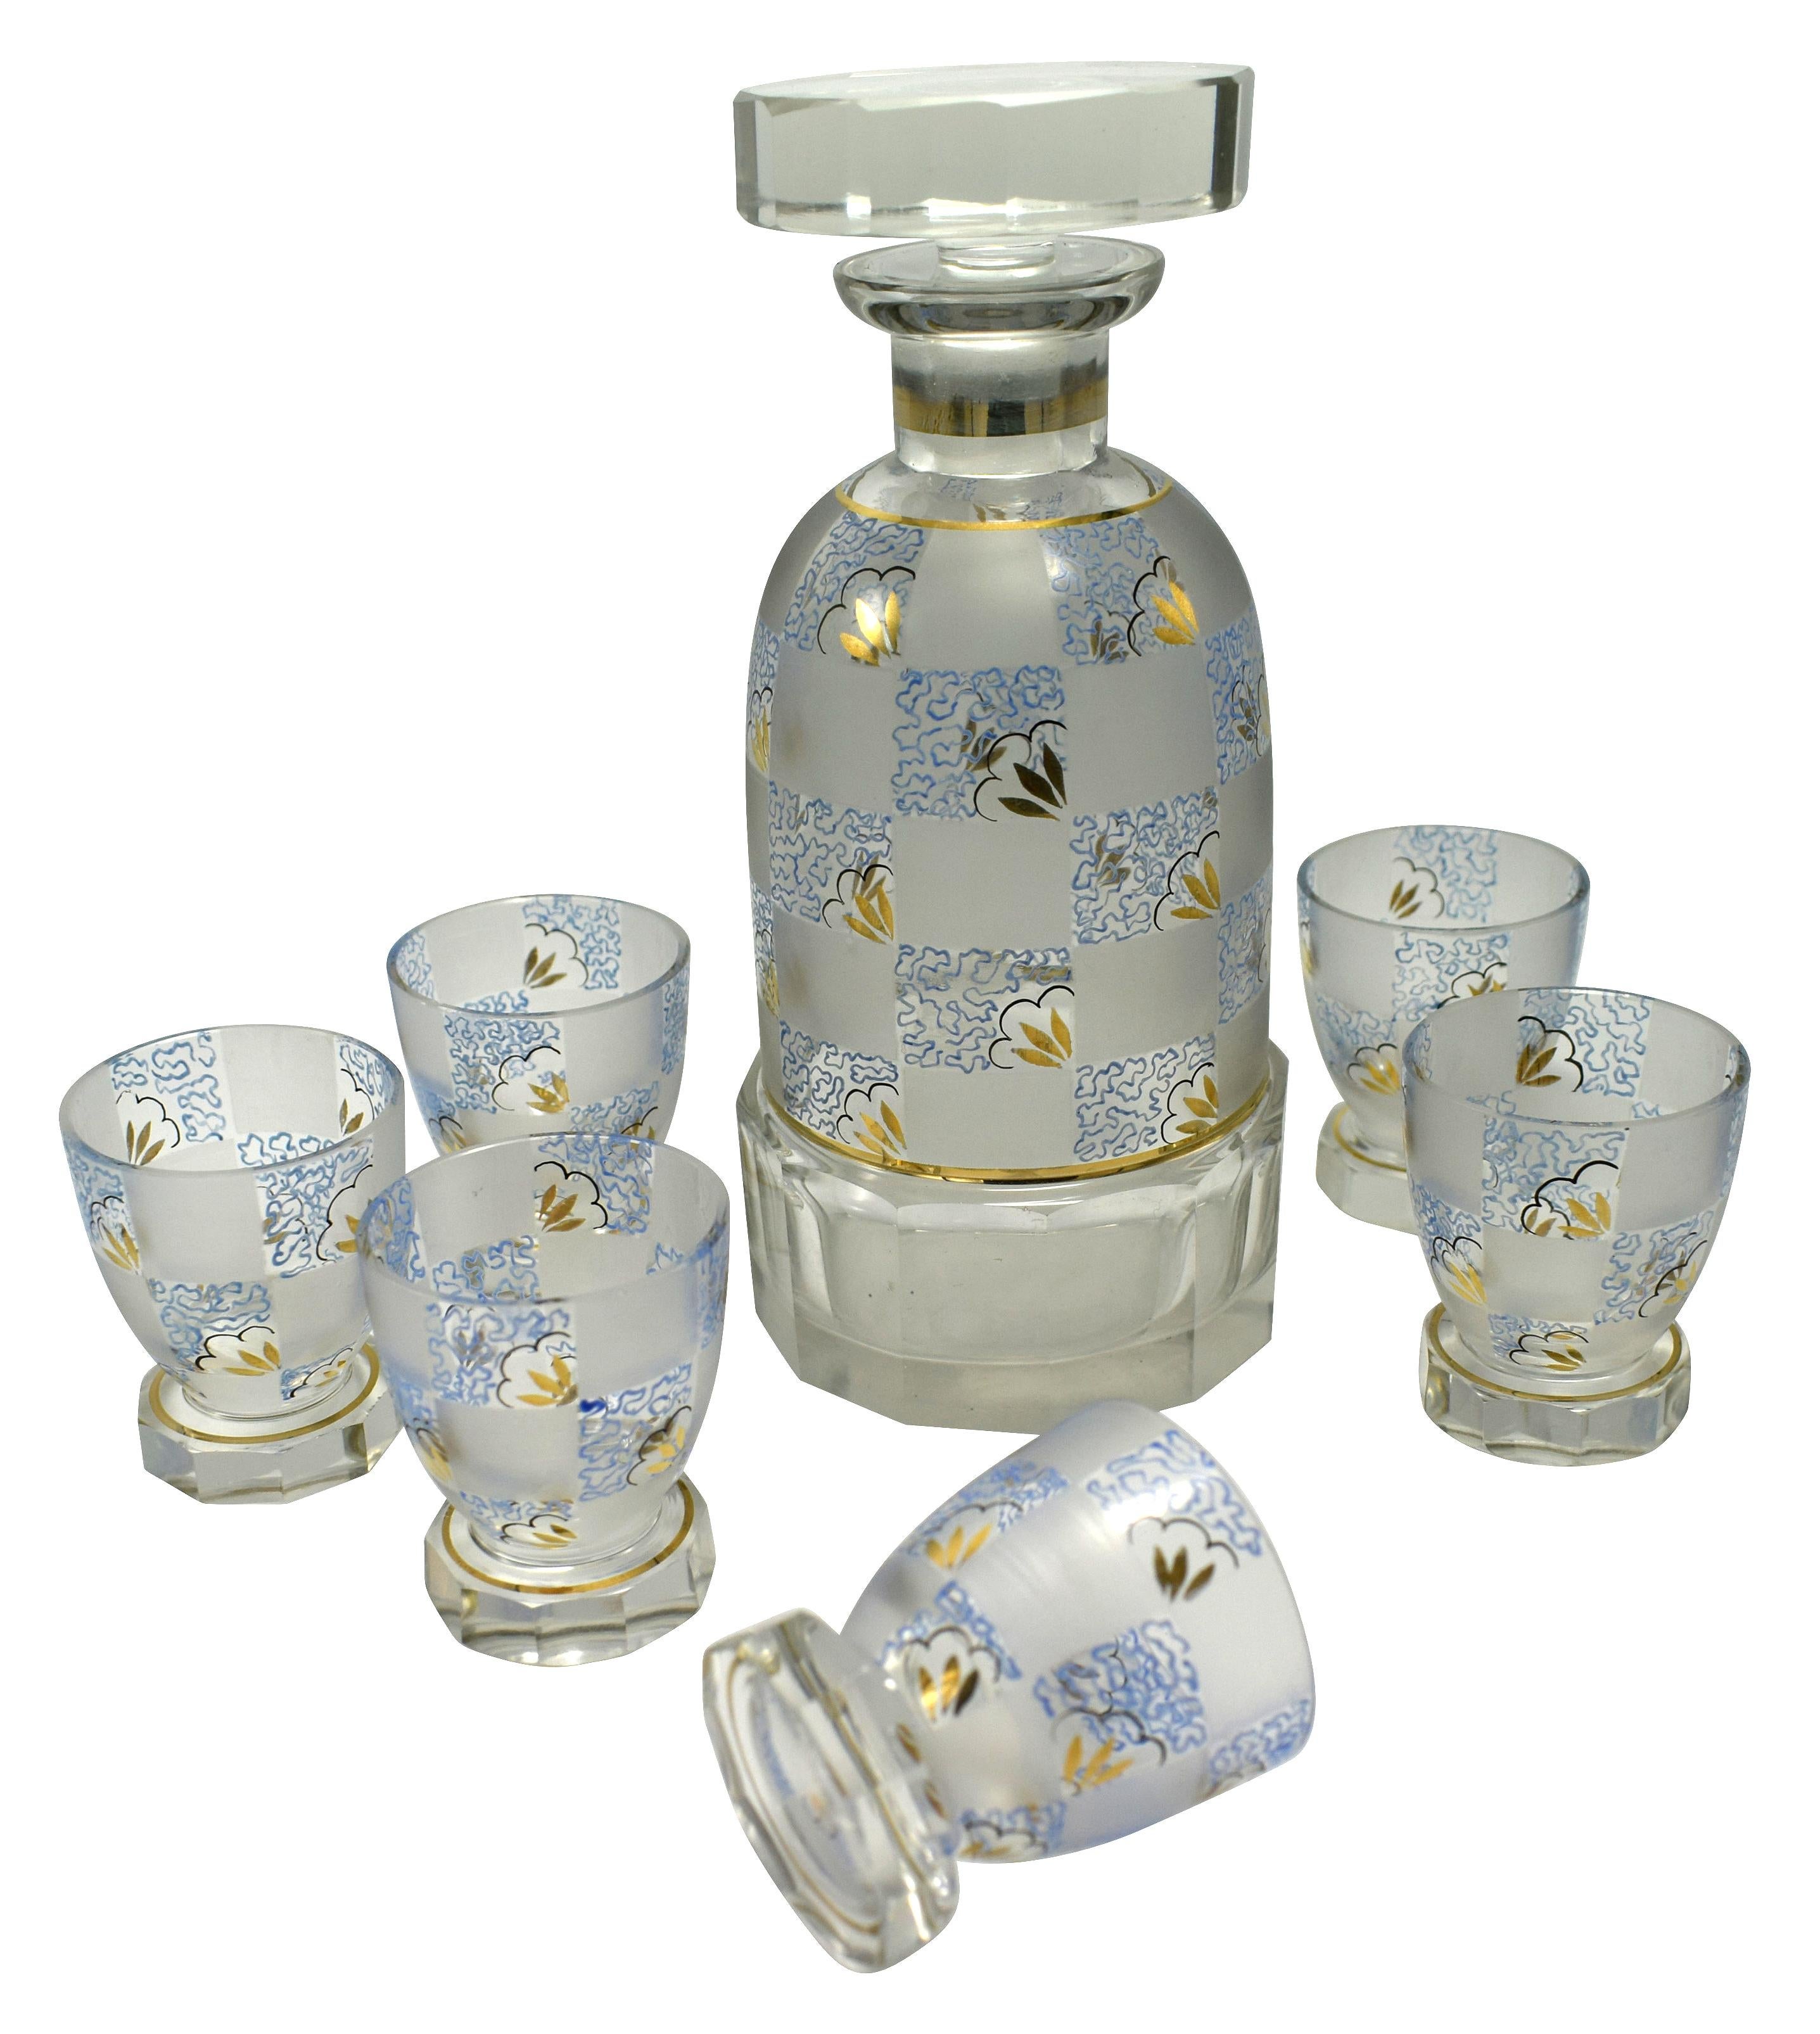 Very high quality 1930s Art Deco Czech glass decanter set. Features a Classic shape decanter with stopped and six shot sized glasses. The whole set is hand painted in beautiful soft tones of blue, black and gold enamel on a chequered background of